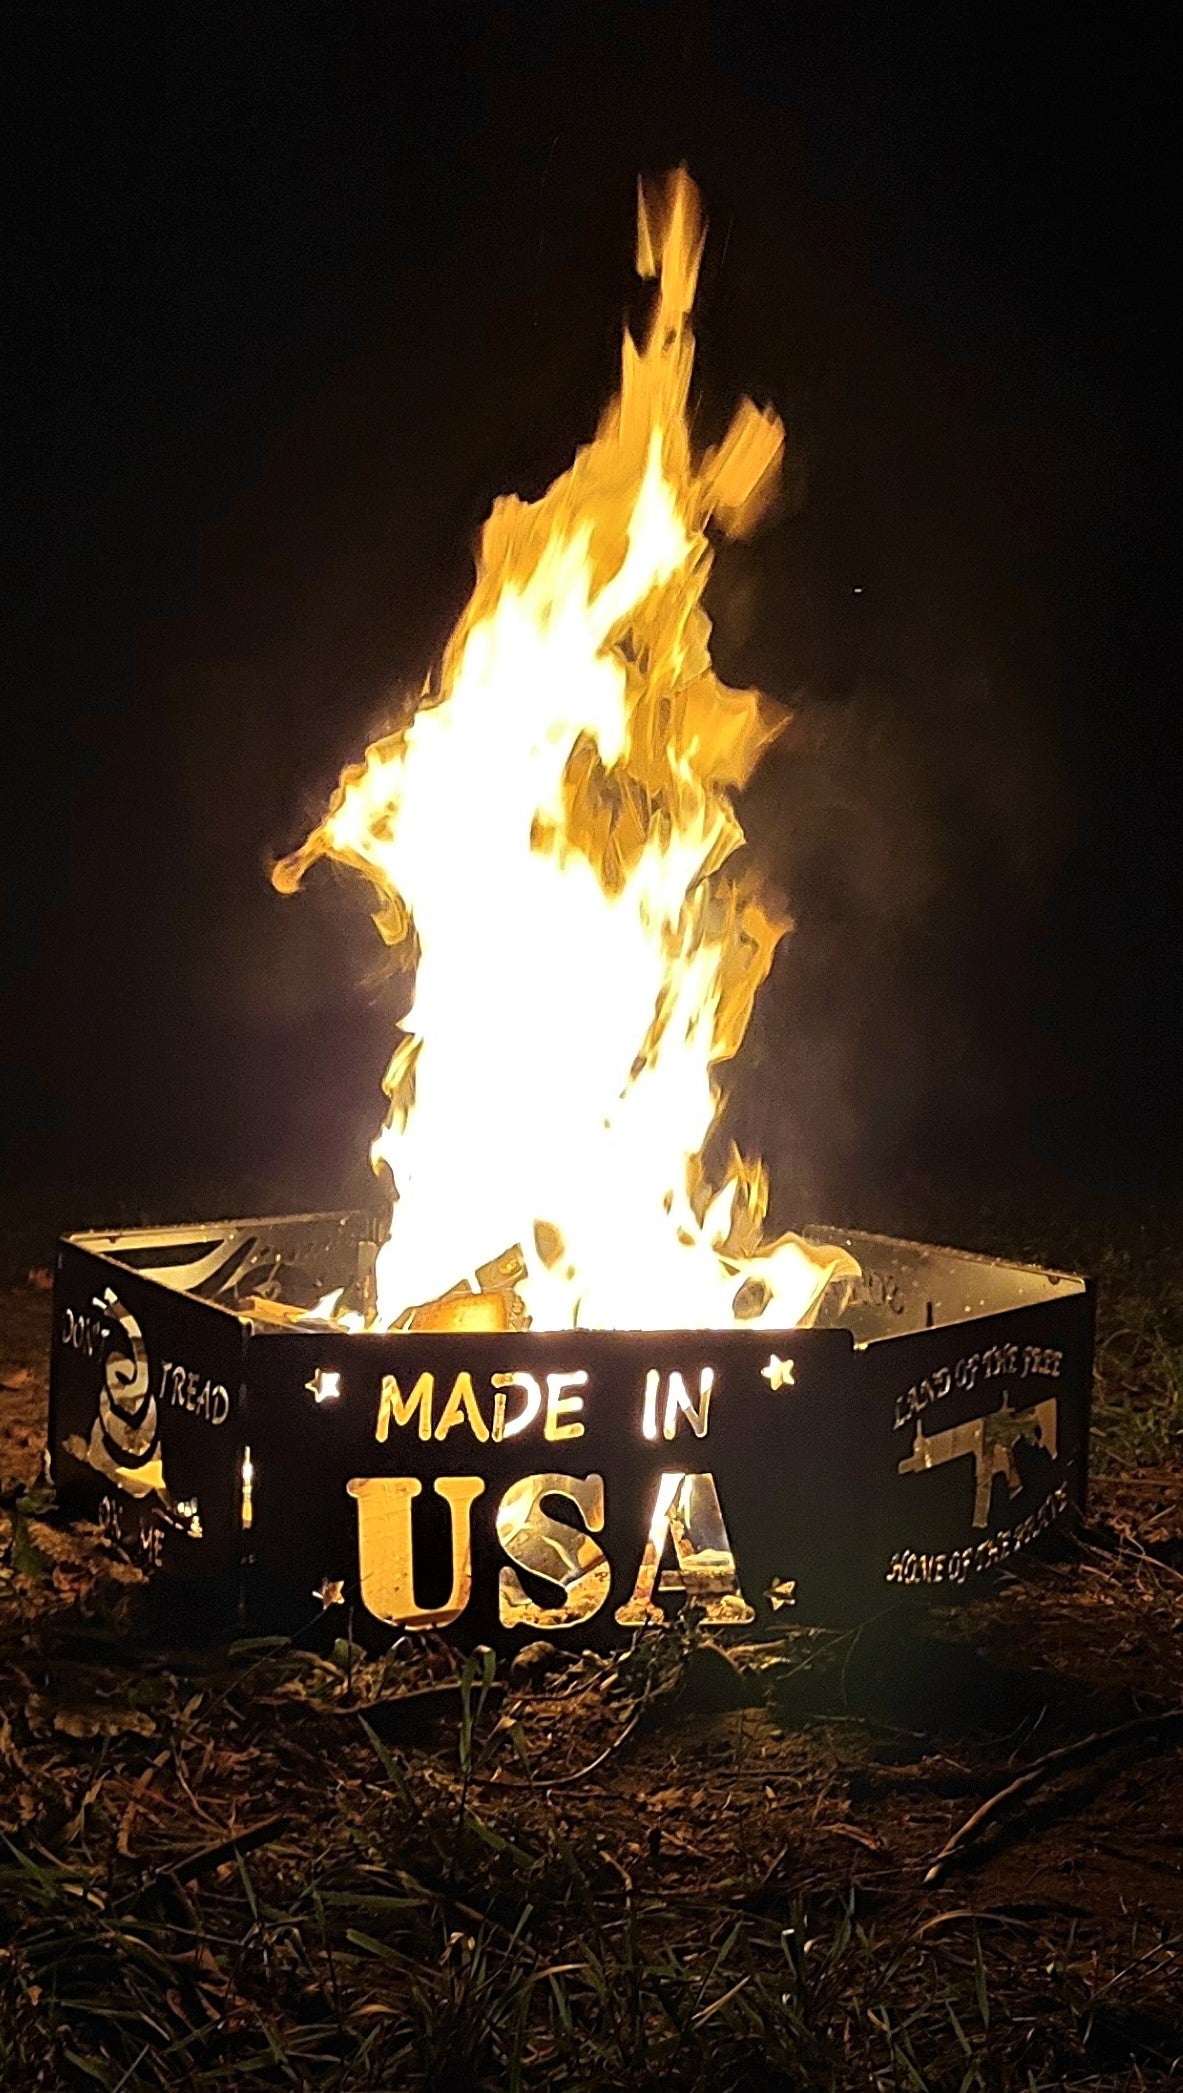 black metal Patriotic style inspiring with fire burning in it.